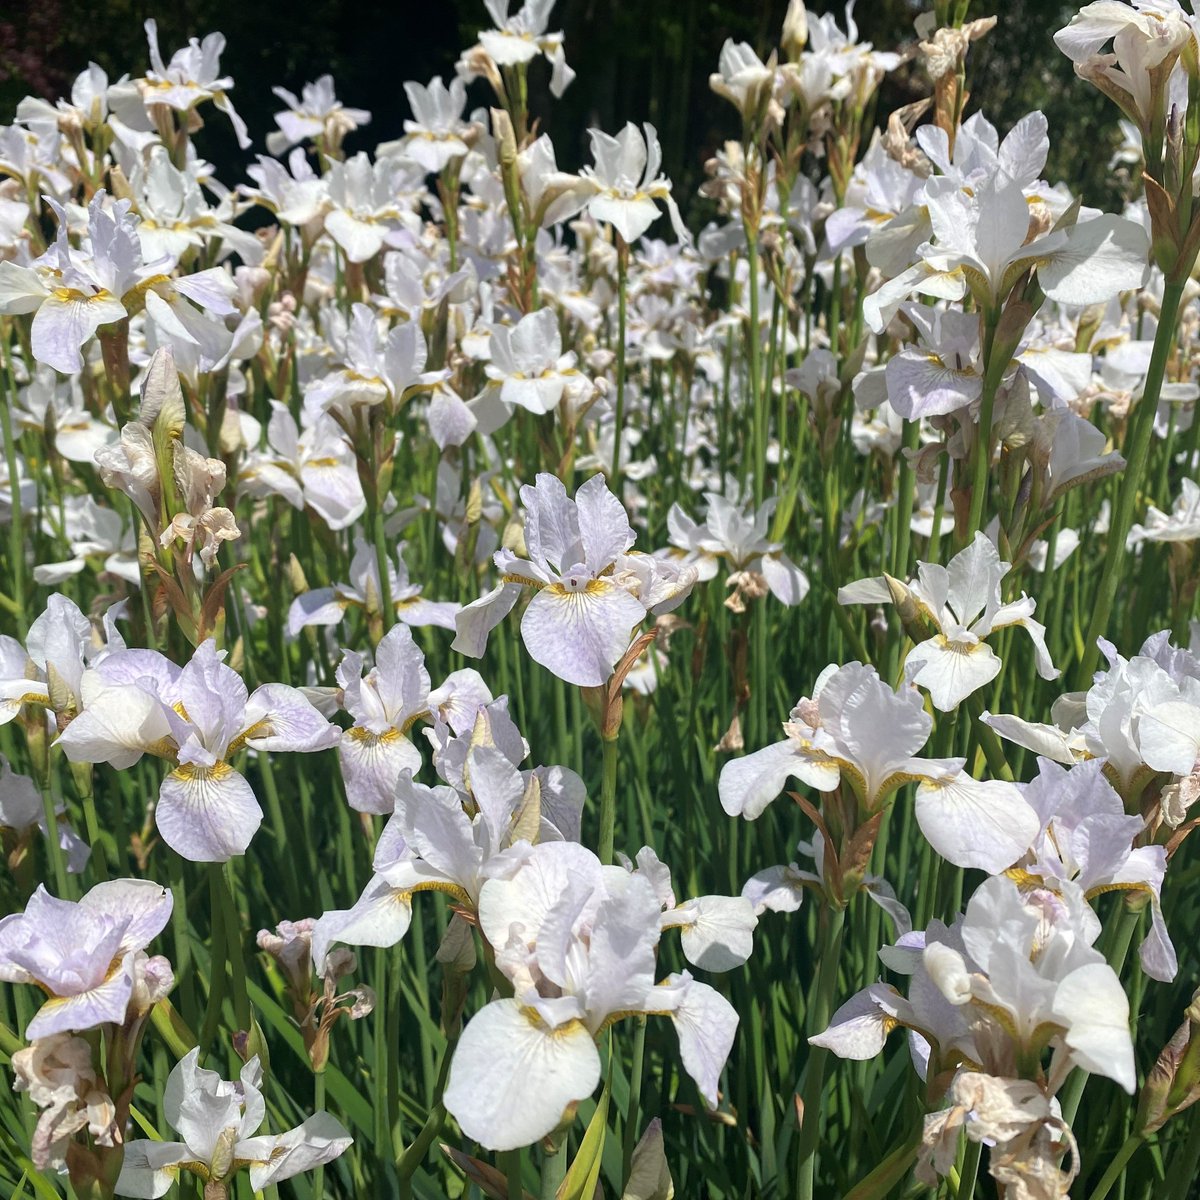 Take a stroll around RHS Garden Wisley to find an array of beautiful irises on display right now. Lots can be found in Oakwood, on the Rock Garden and around the Glasshouse Landscape.

Plan your next visit: rhs.org.uk/wisley

#Iris